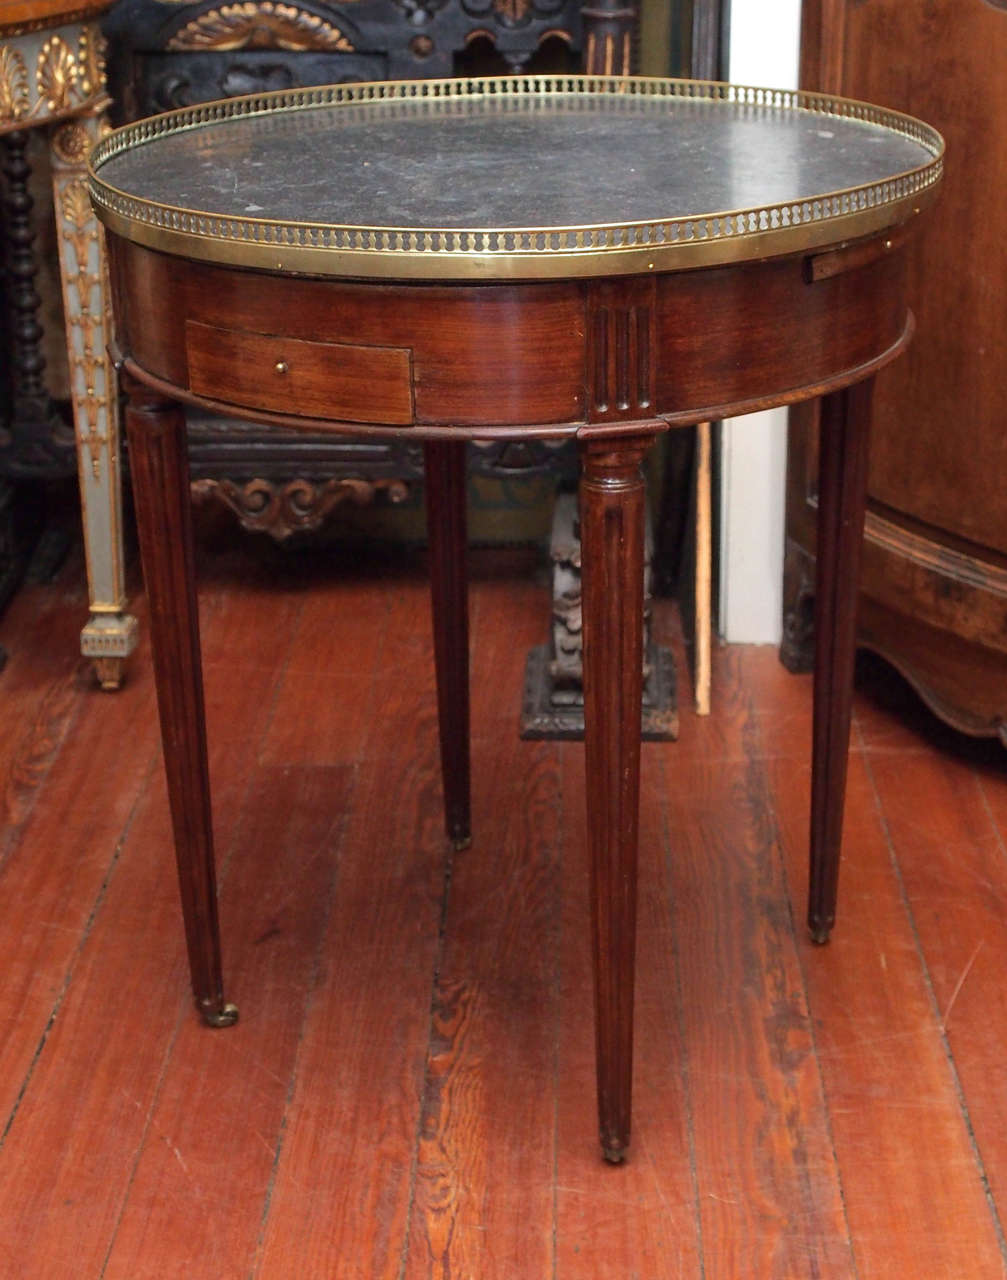 French Louis XVI Period Bouillotte Games Table with pierced brass rail, two candleholders and two drawers. Original bronze wheels